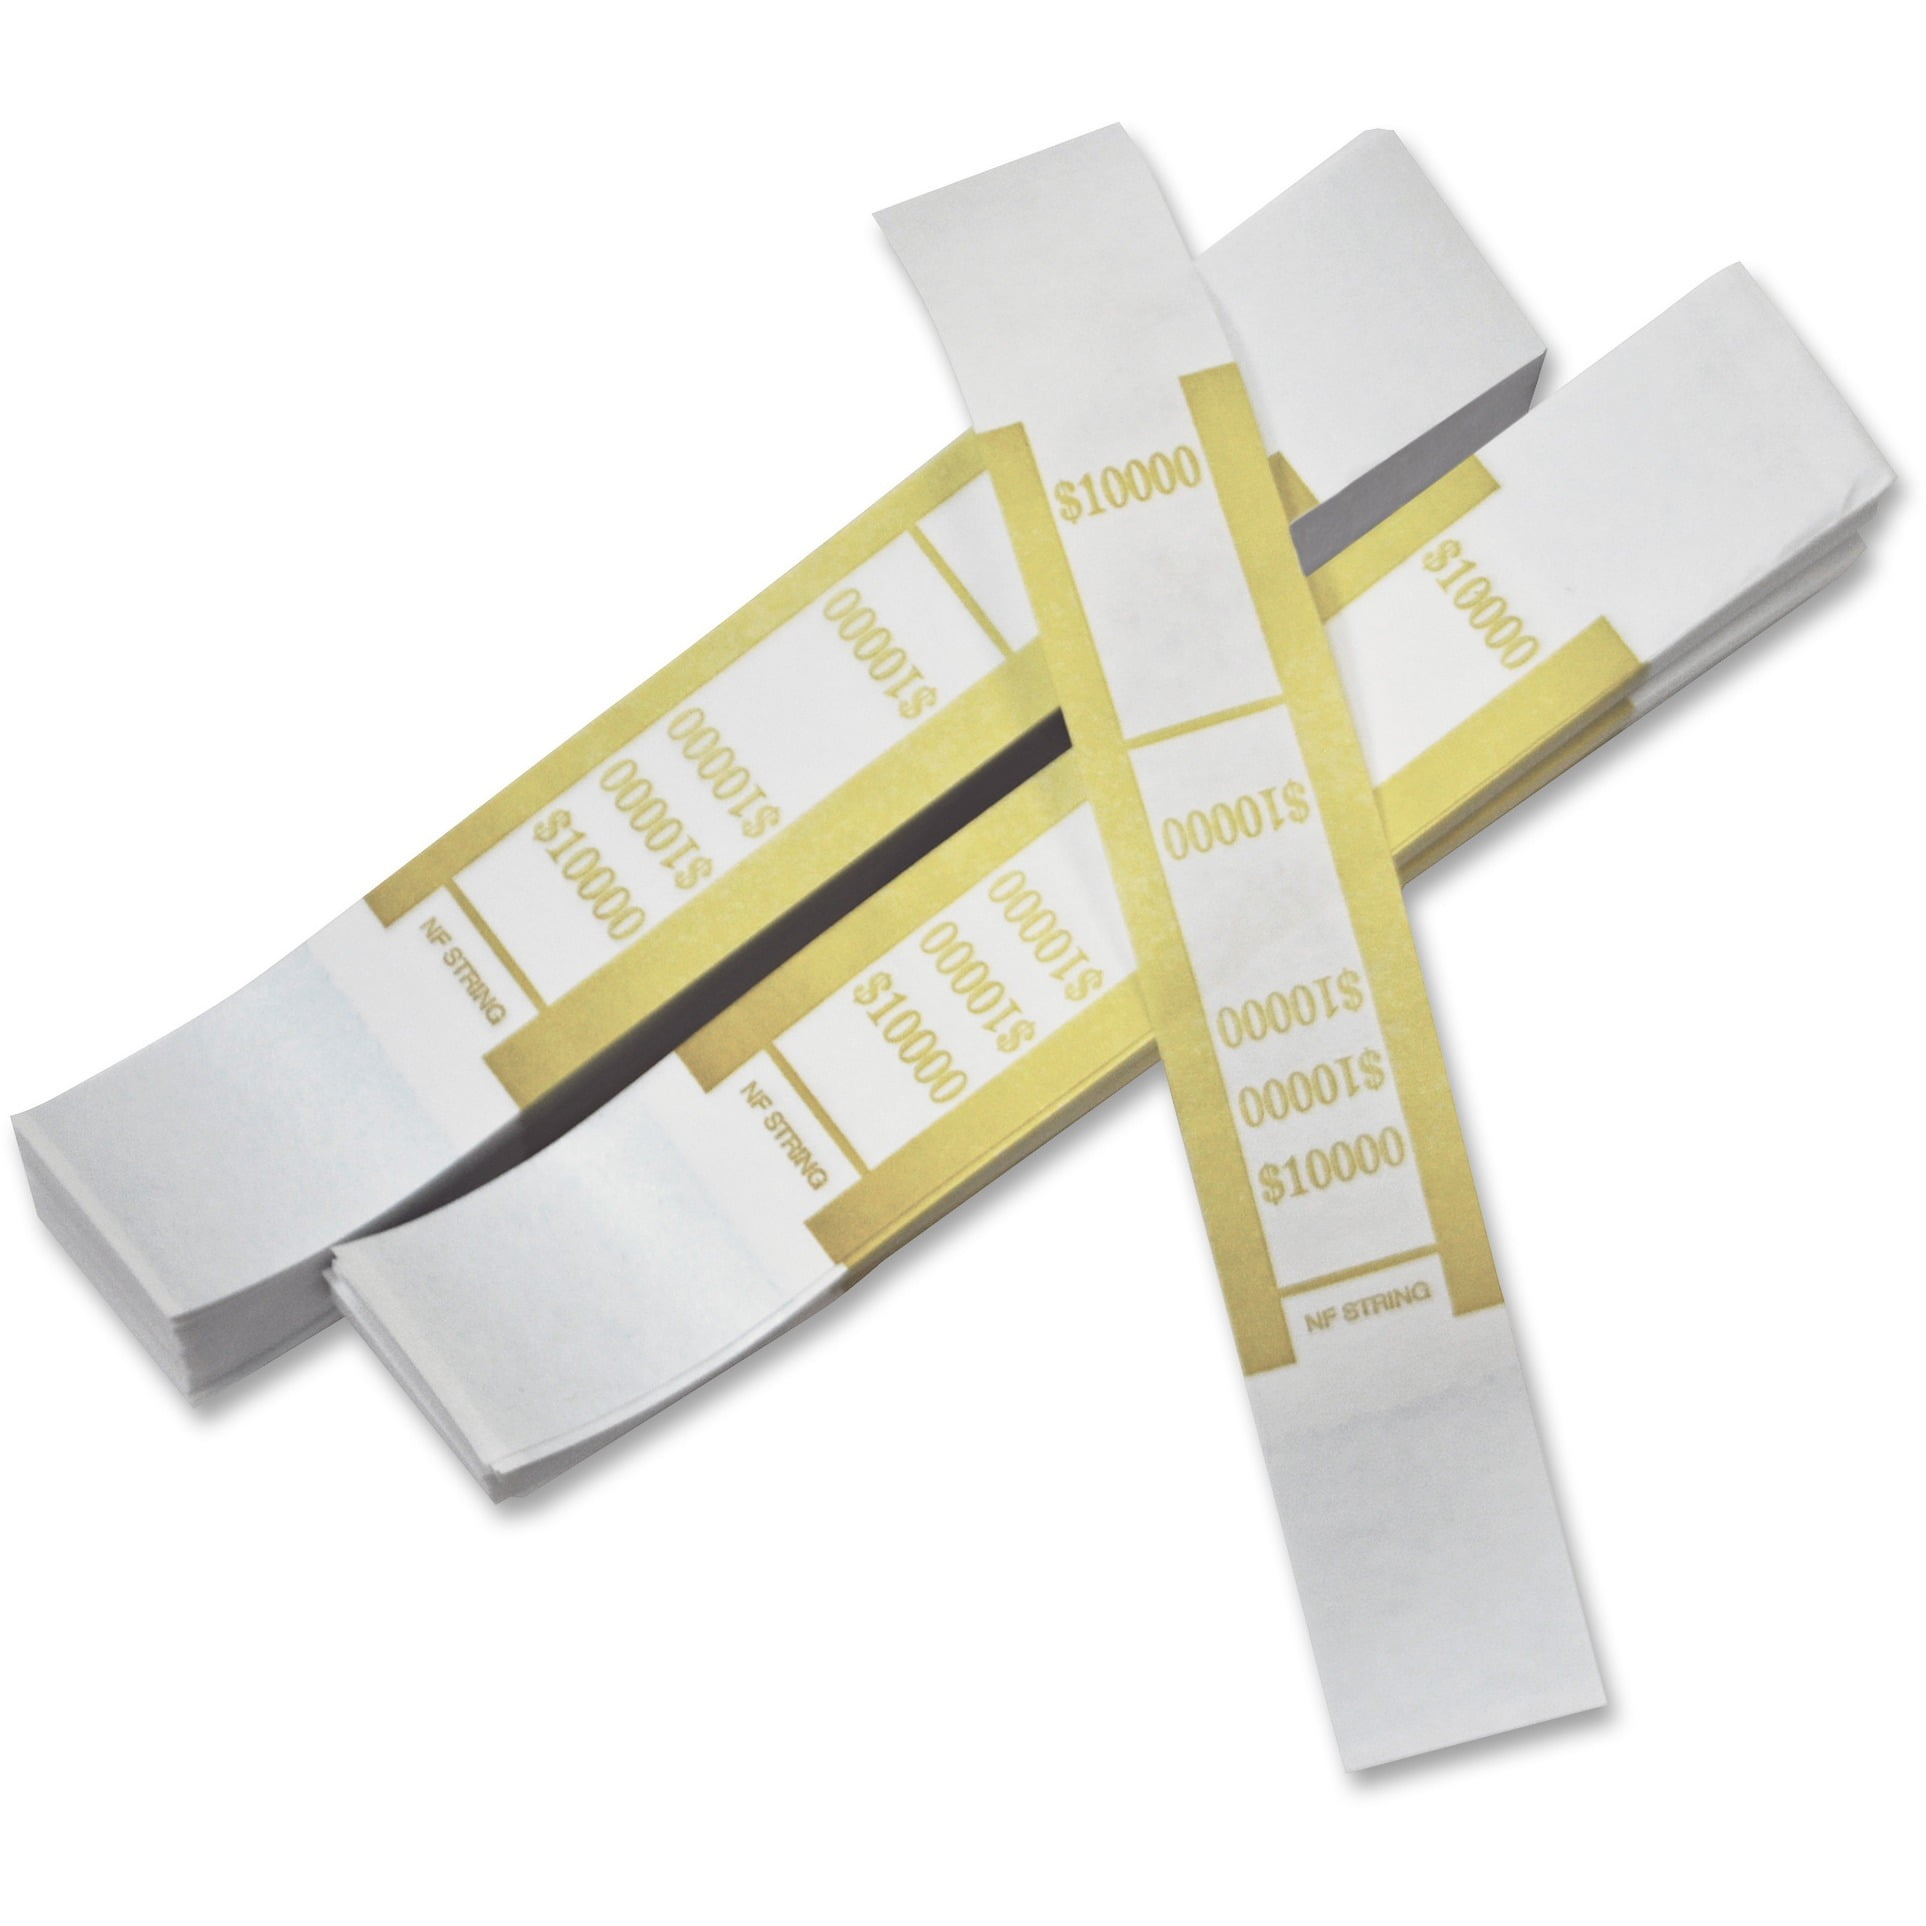 pm-pmc55010-currency-straps-1000-pack-white-mustard-walmart